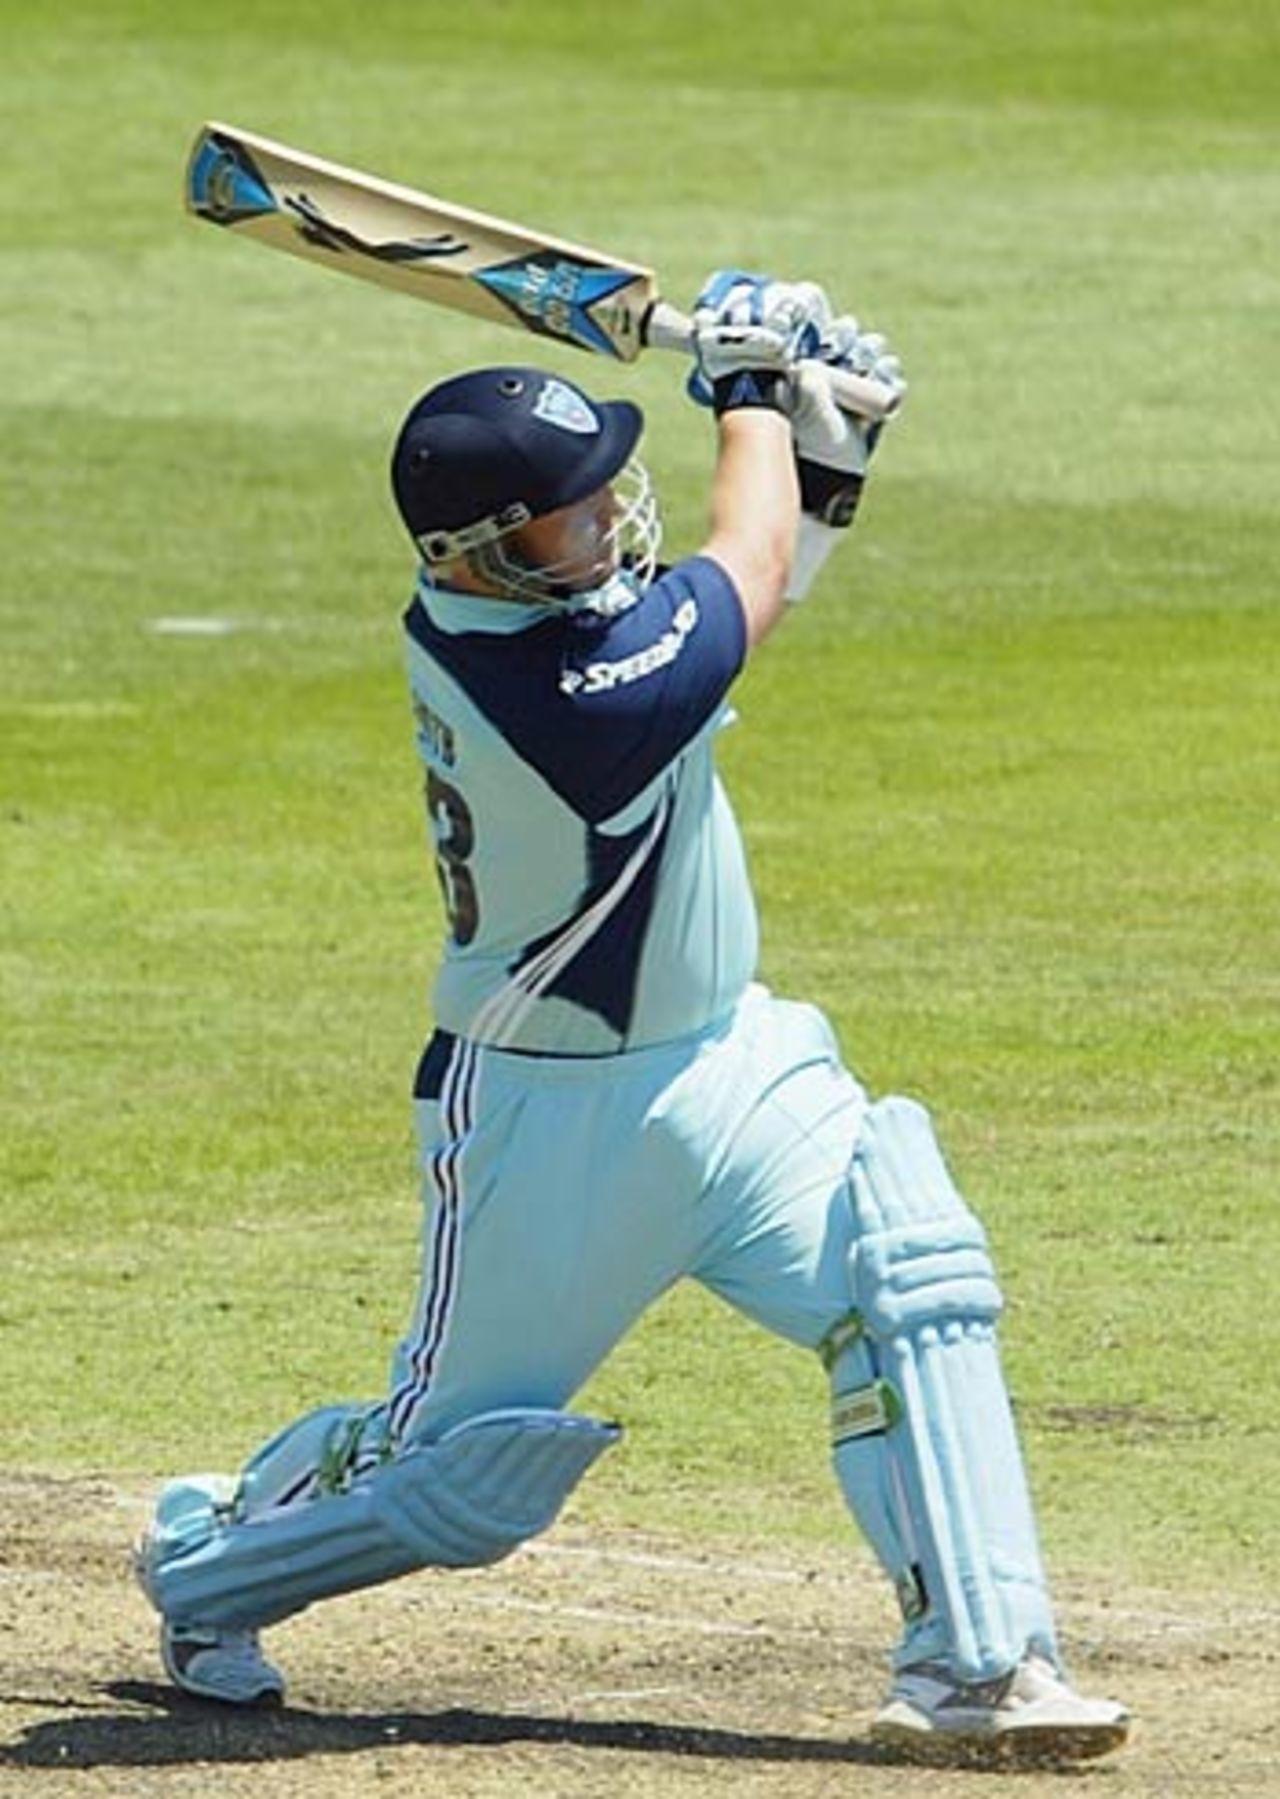 Daniel Smith hits out, New South Wales v Queensland, Sydney, November 13, 2005